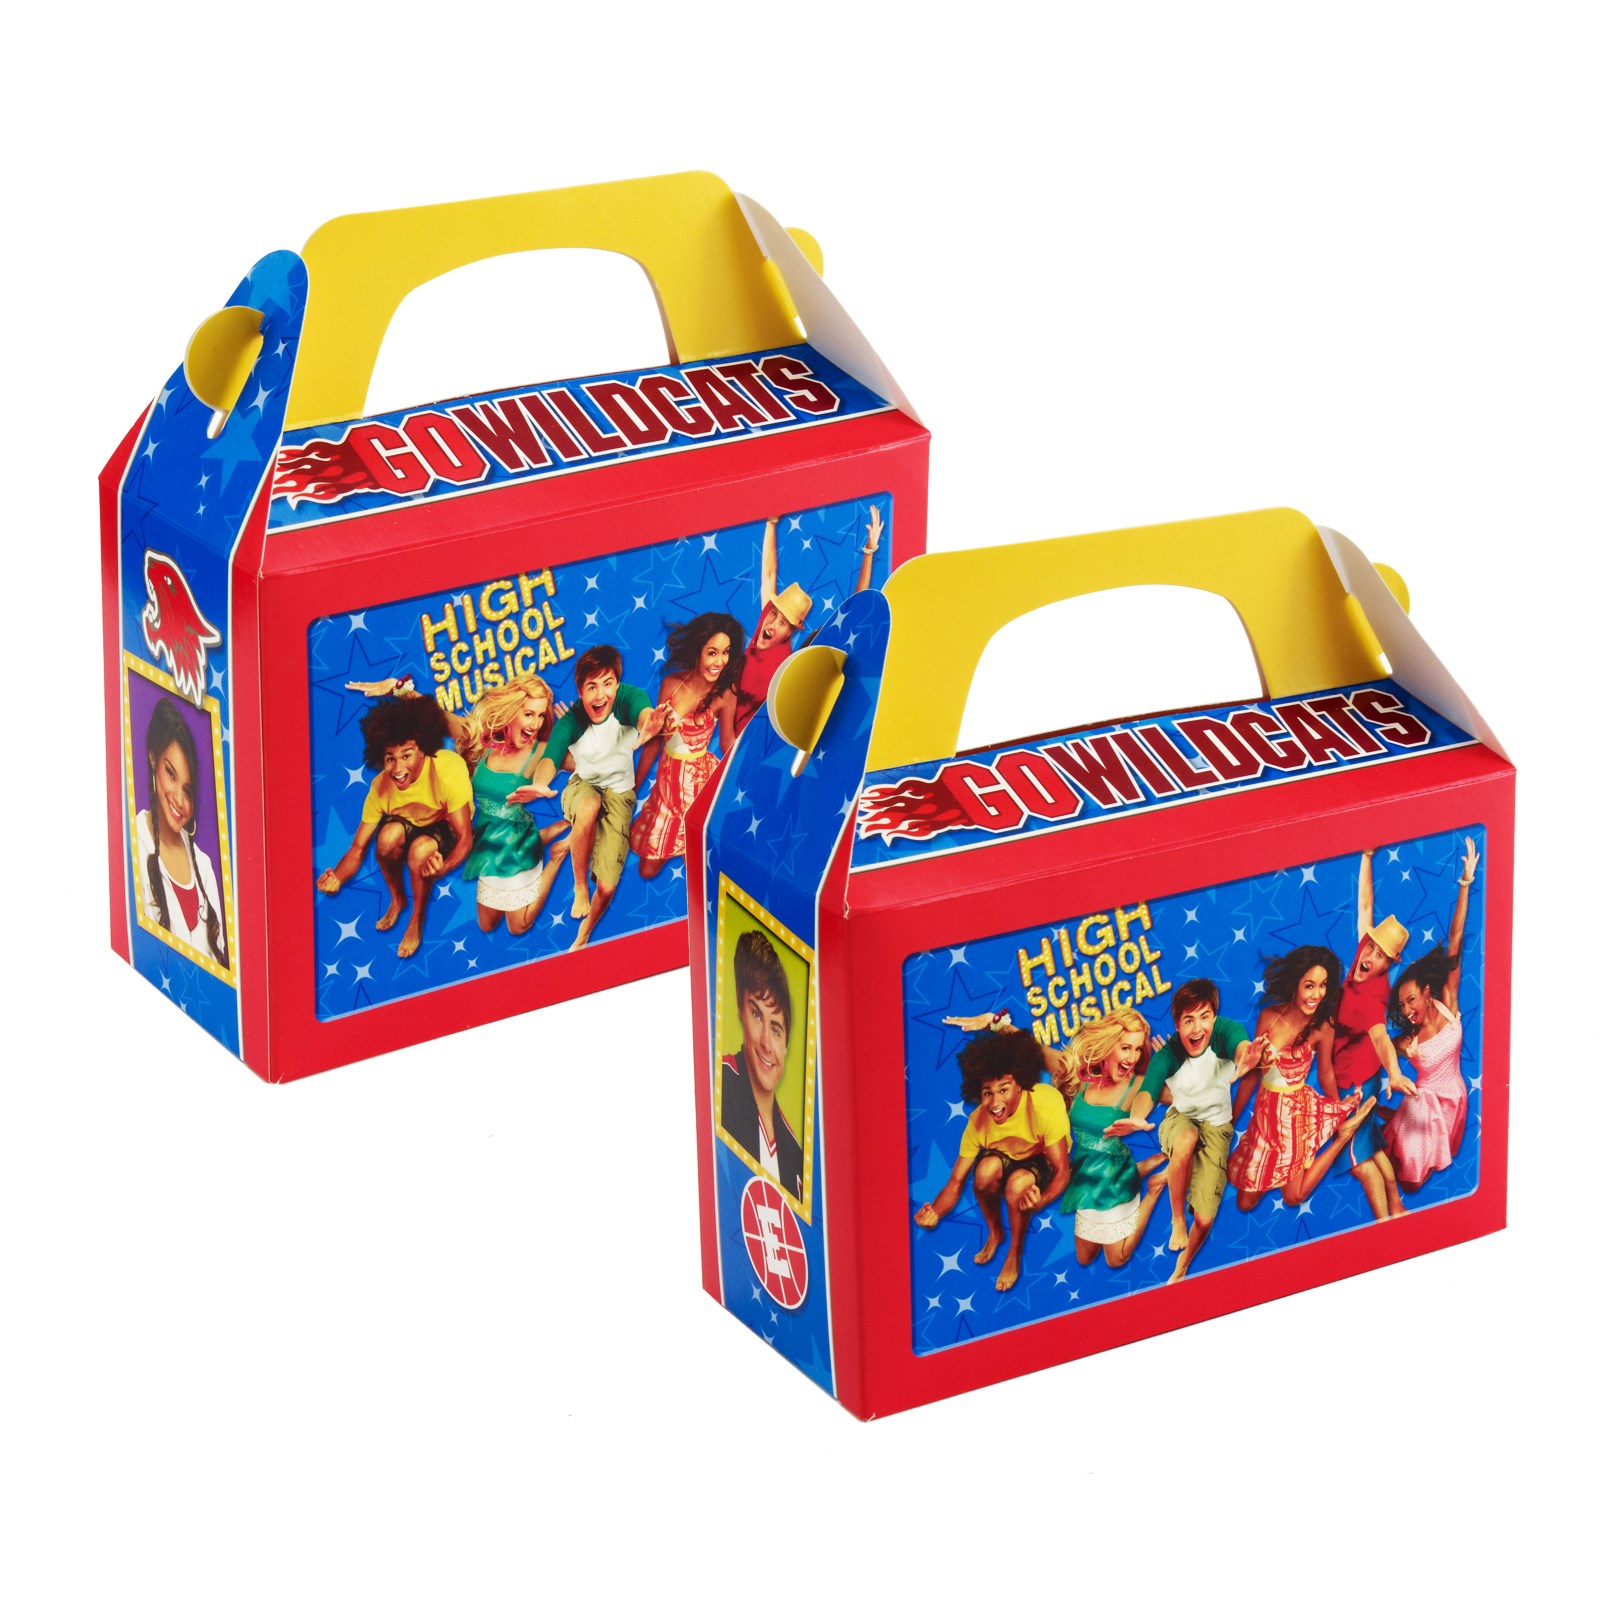 High School Musical: Friends 4 Ever Treat Boxes (4 count)